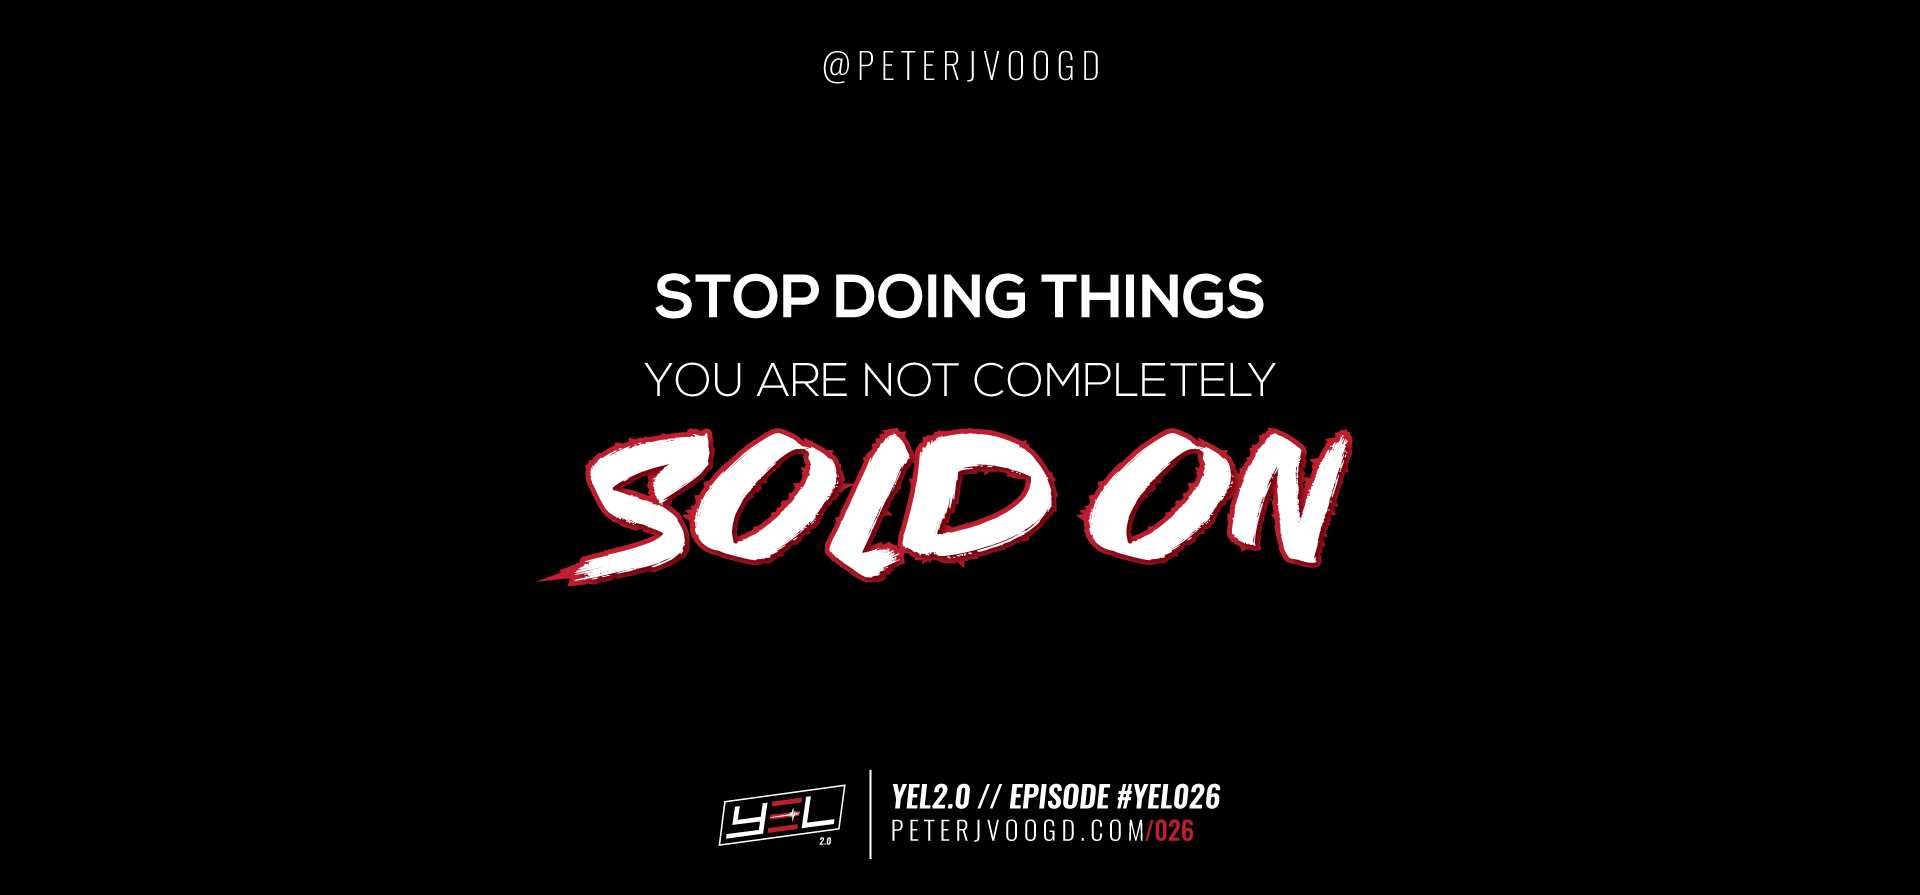 yel2-0_podcast026_stopdoingthings_ep026_3